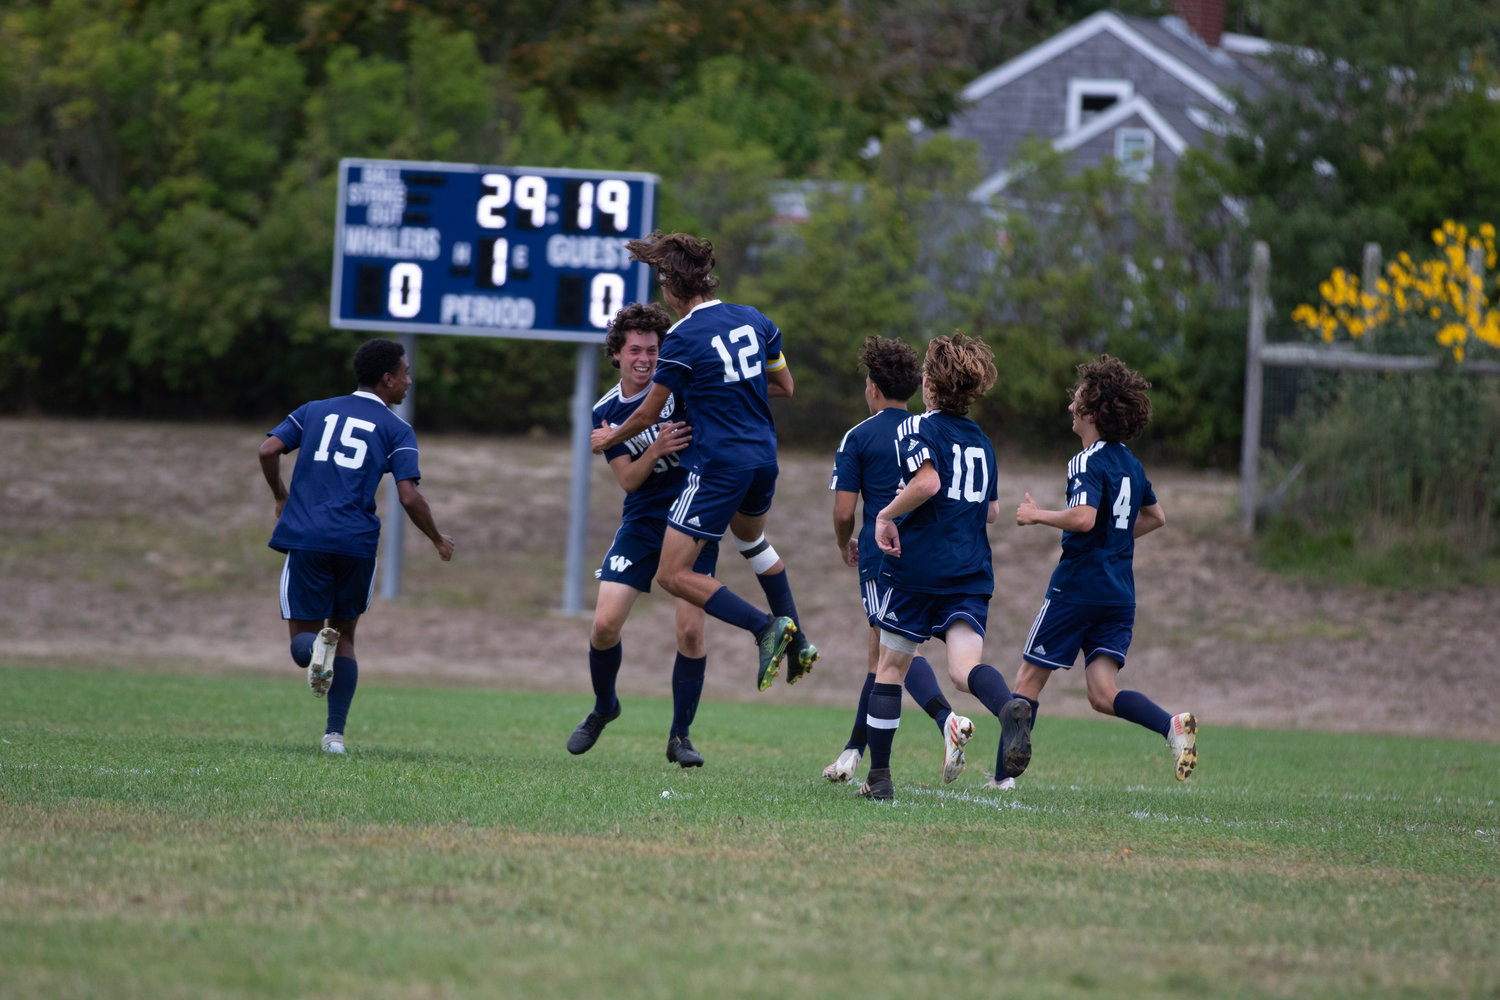 The Whalers celebrate the first of two goals scored by Ryan Coleman during Tuesday's match with Sandwich.